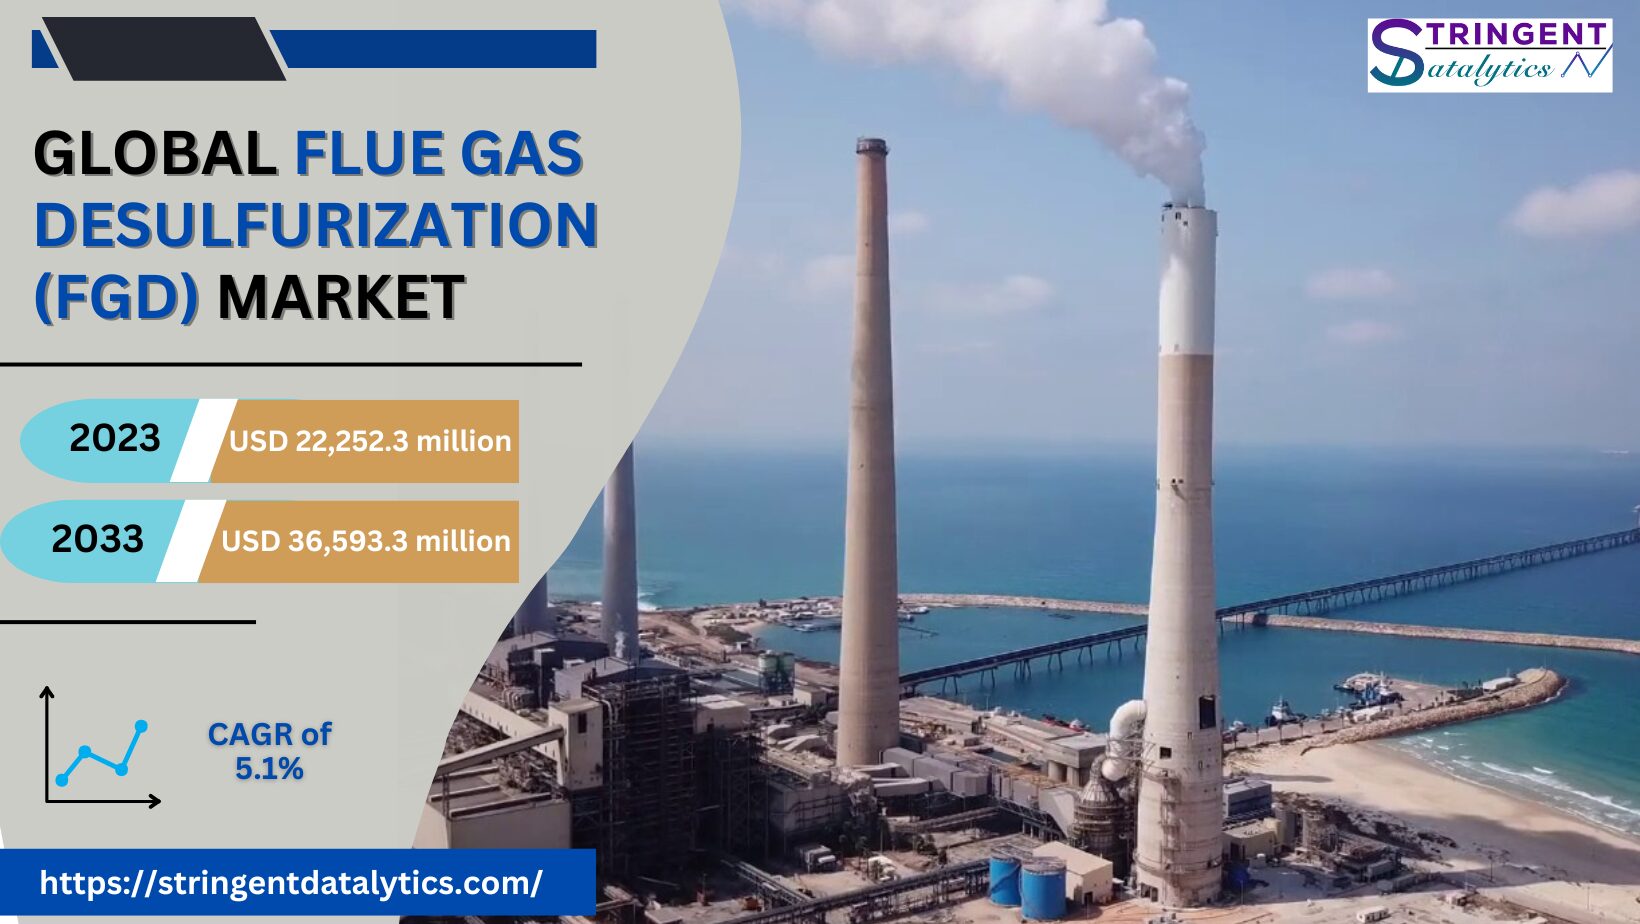 Flue Gas Desulfurization (FGD) Market Analysis, Key Trends, Growth Opportunities, Challenges and Key Players by 2033